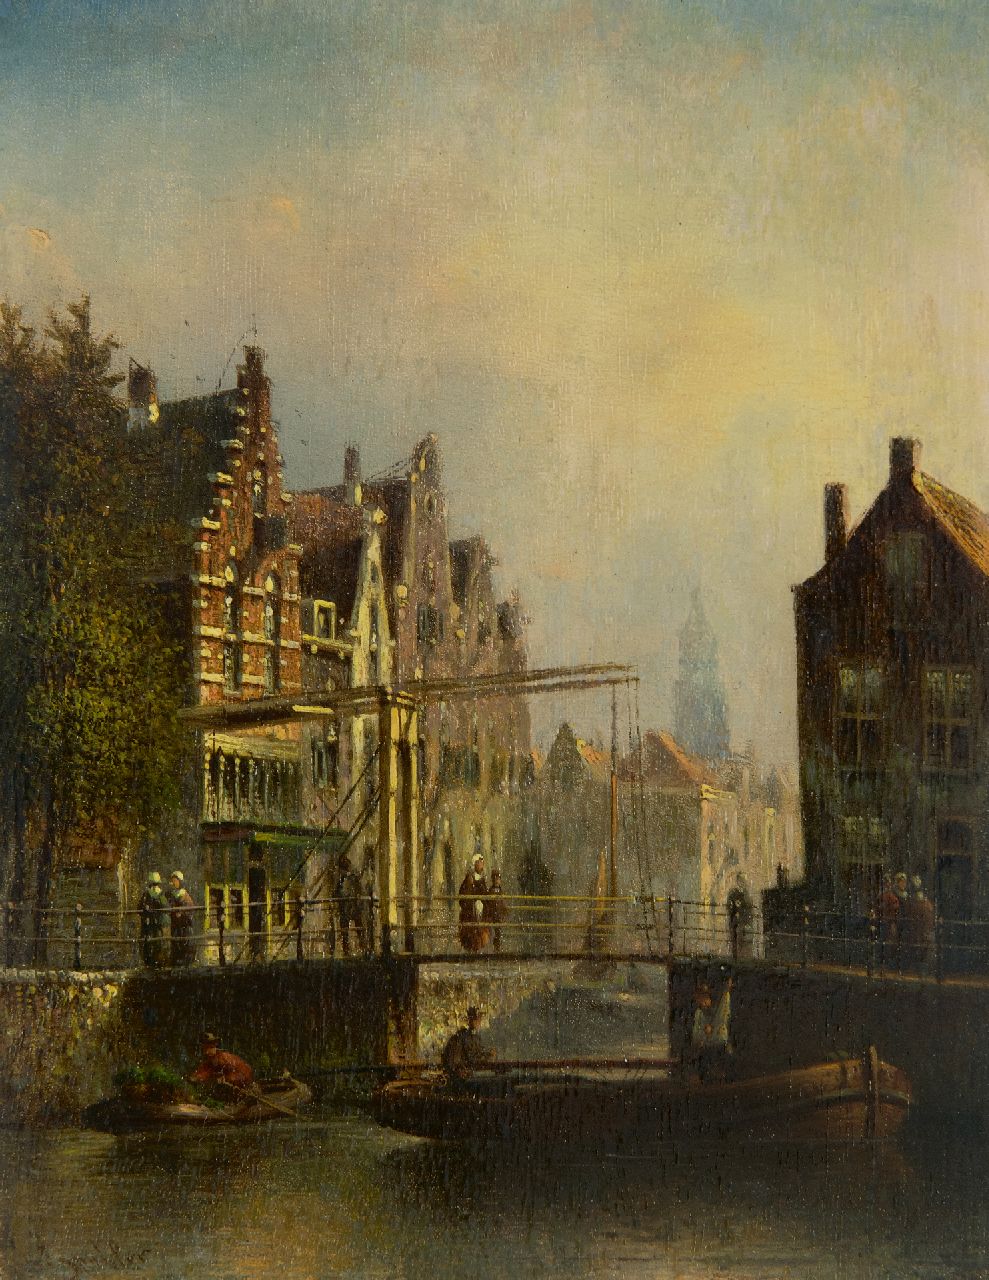 Spohler J.F.  | Johannes Franciscus Spohler | Paintings offered for sale | A Dutch town with a drawbridge, oil on panel 20.4 x 16.0 cm, signed l.l.